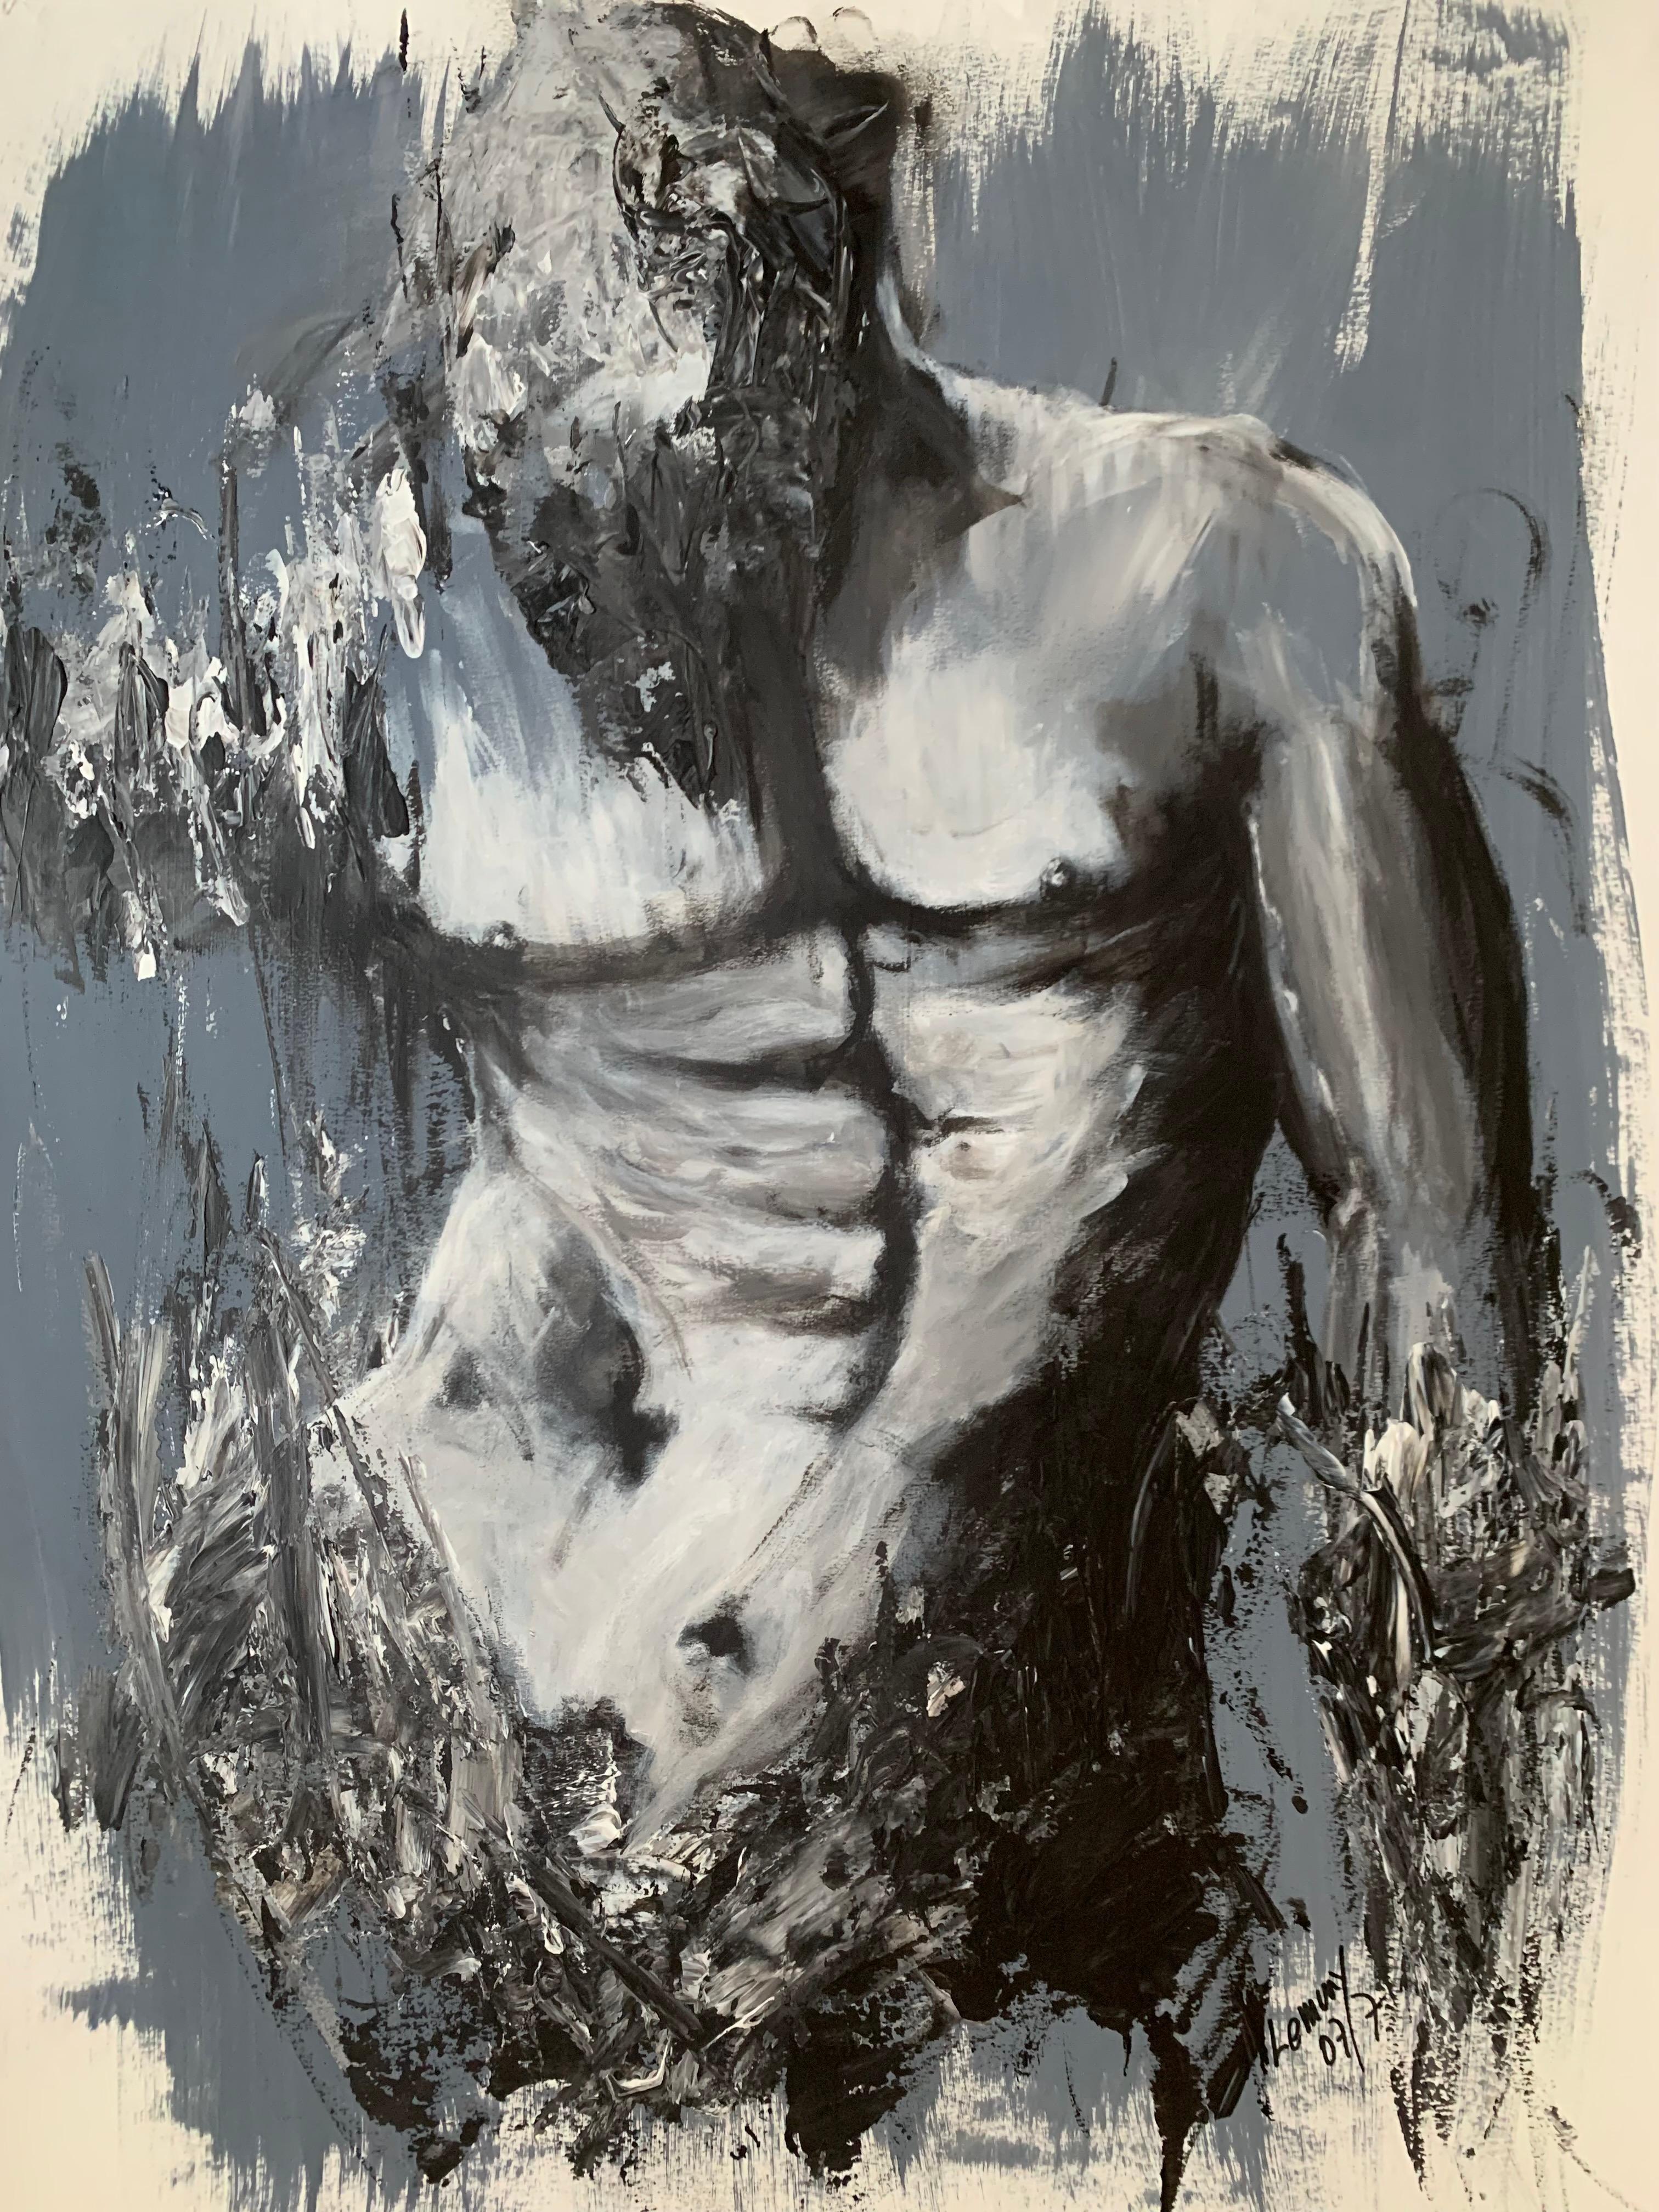 Lemmy Gonthier - Body 3
Acrylic
Numbered and signed lower right of the work
Dimensions: 77 x 68

The human body is at the center of Lemmy's work. His taste for large formats requires precision
striking anatomy. The movement that is suggested in each